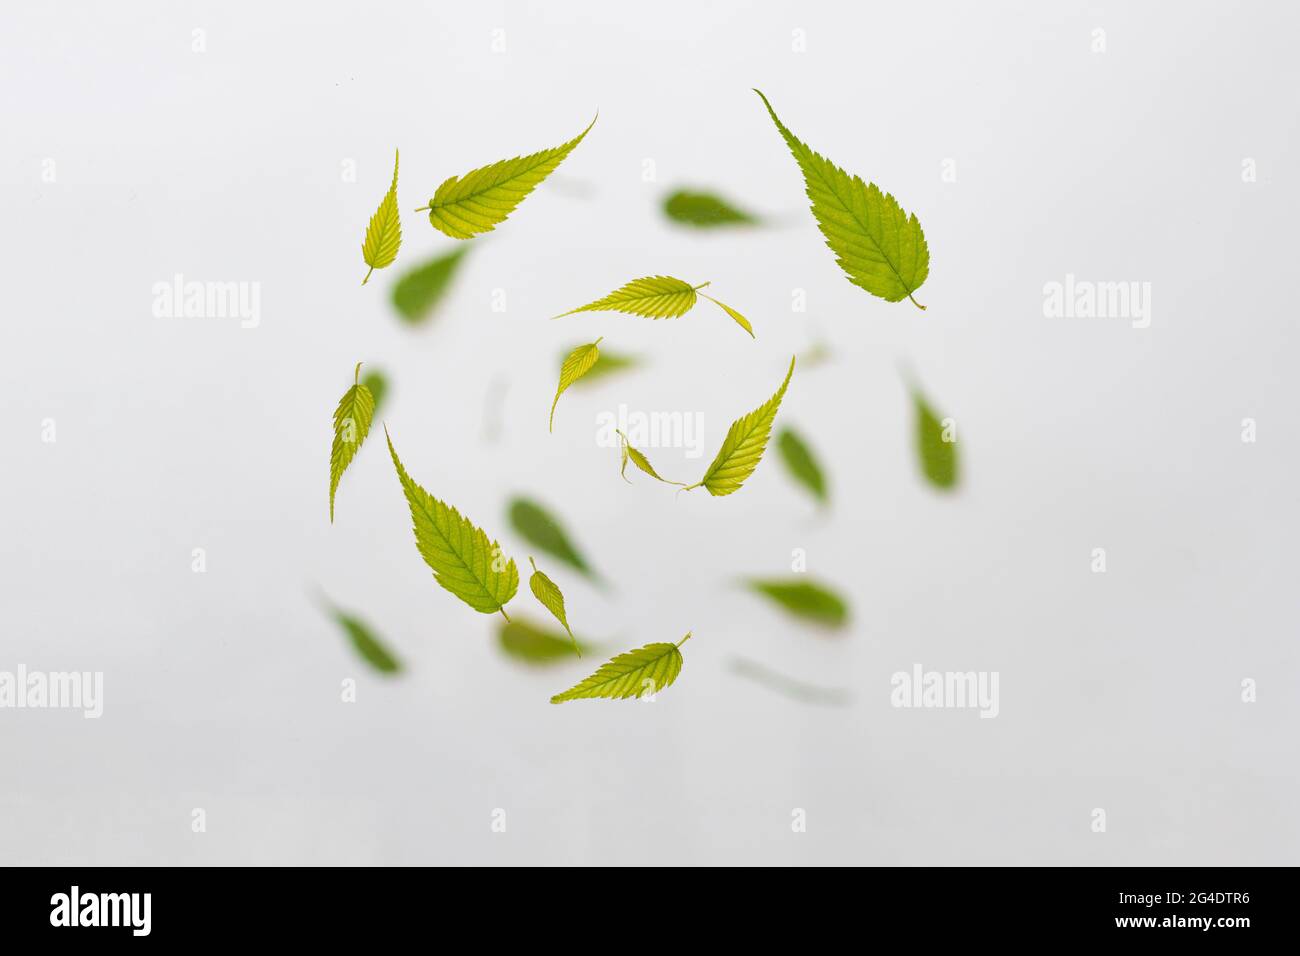 Random circle flying fresh green leaves isolated on white background with copy space Stock Photo